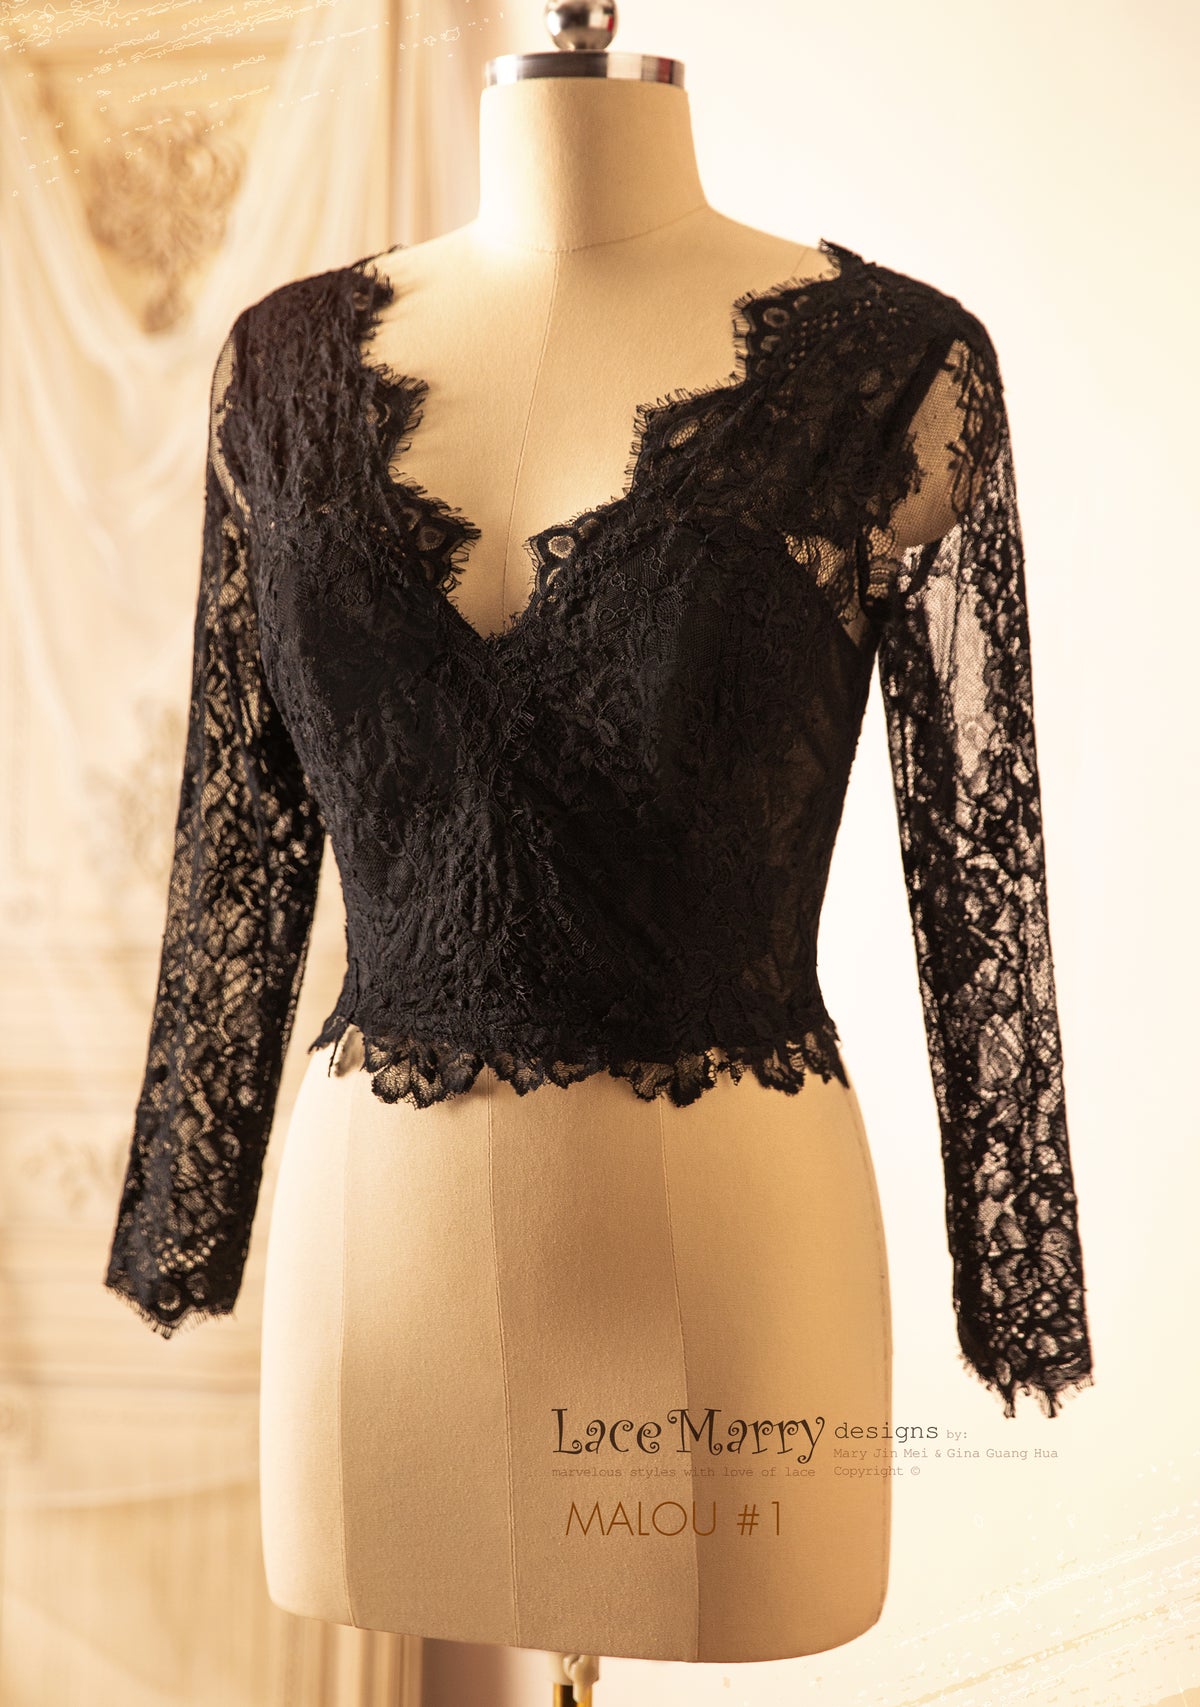 MALOU #1 / Black Lace Bridal Crop Top with Long Sleeves